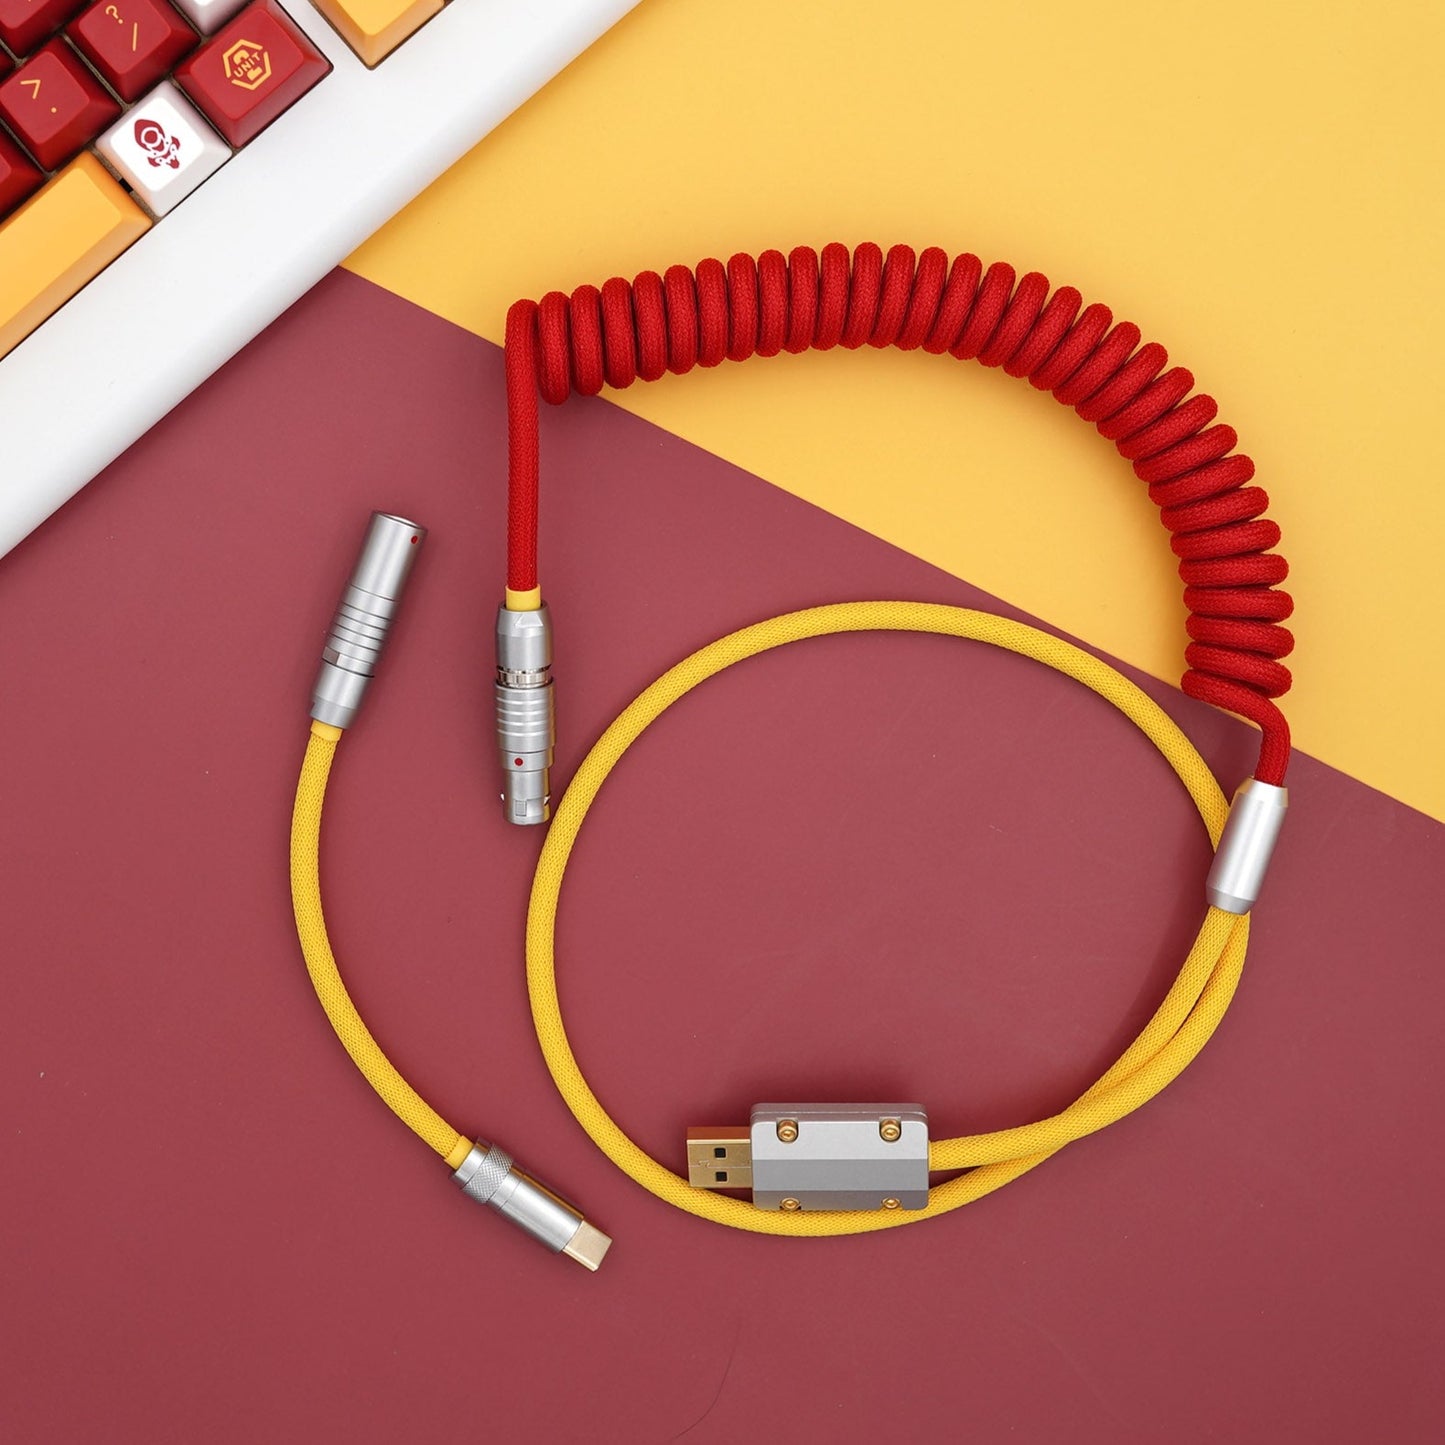 Sleeved Coiled Keyboard Aviator Cable, Lemo Style Connector - Red/Yellow